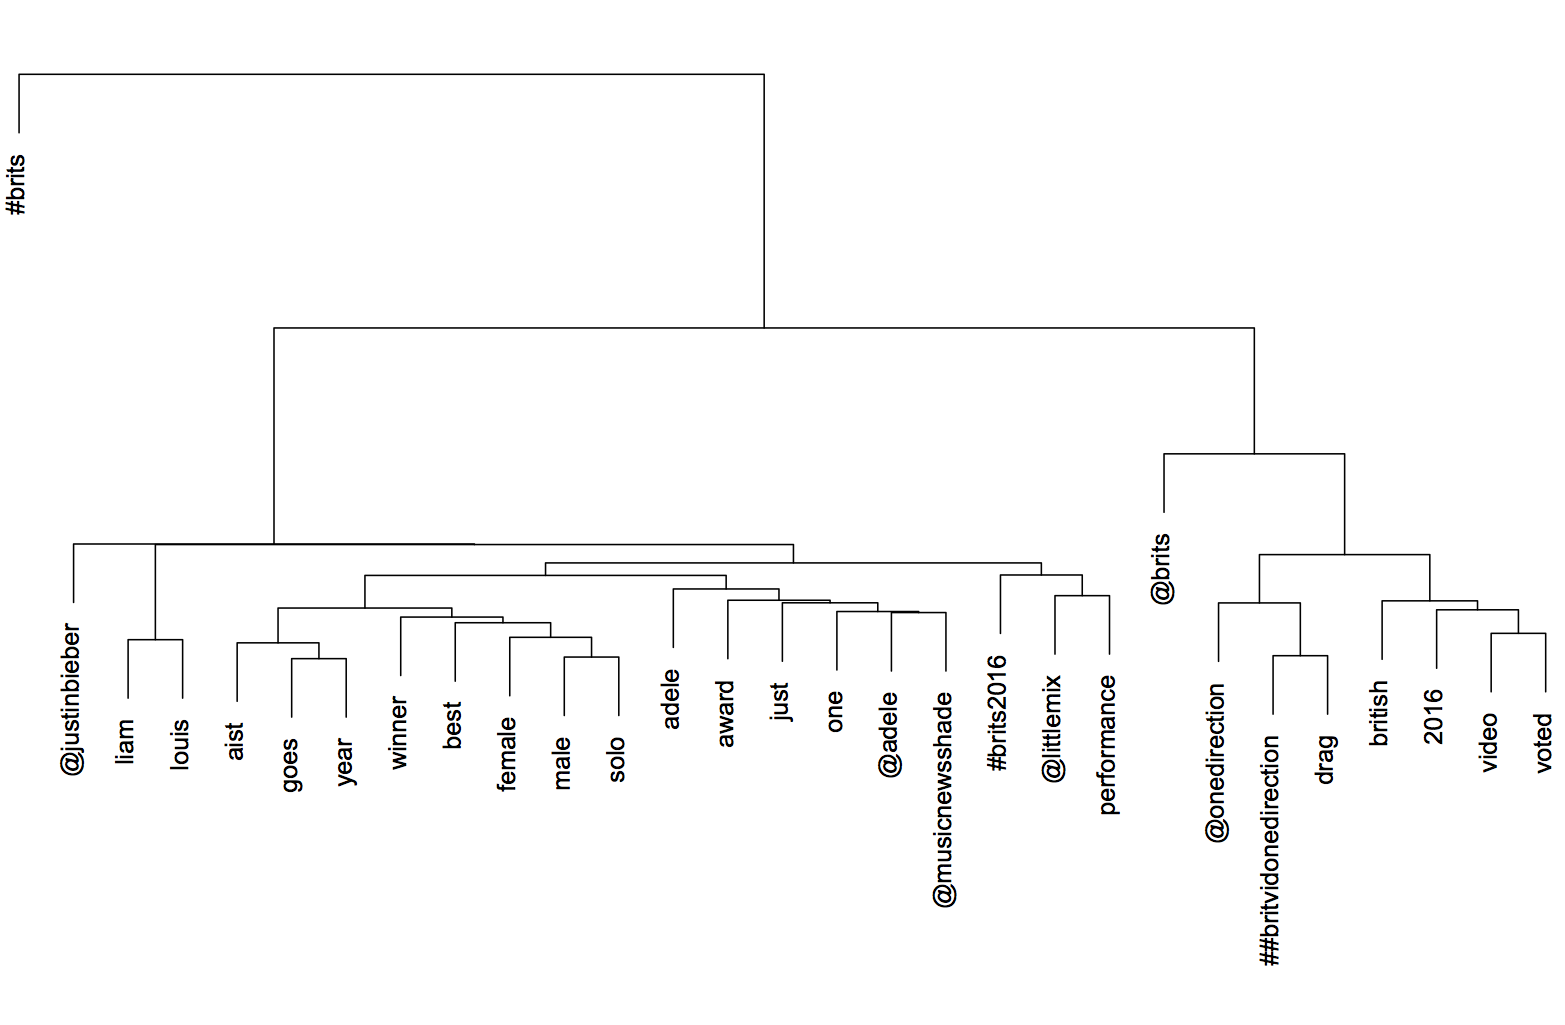 Hierarchical dendrogram of all tweets